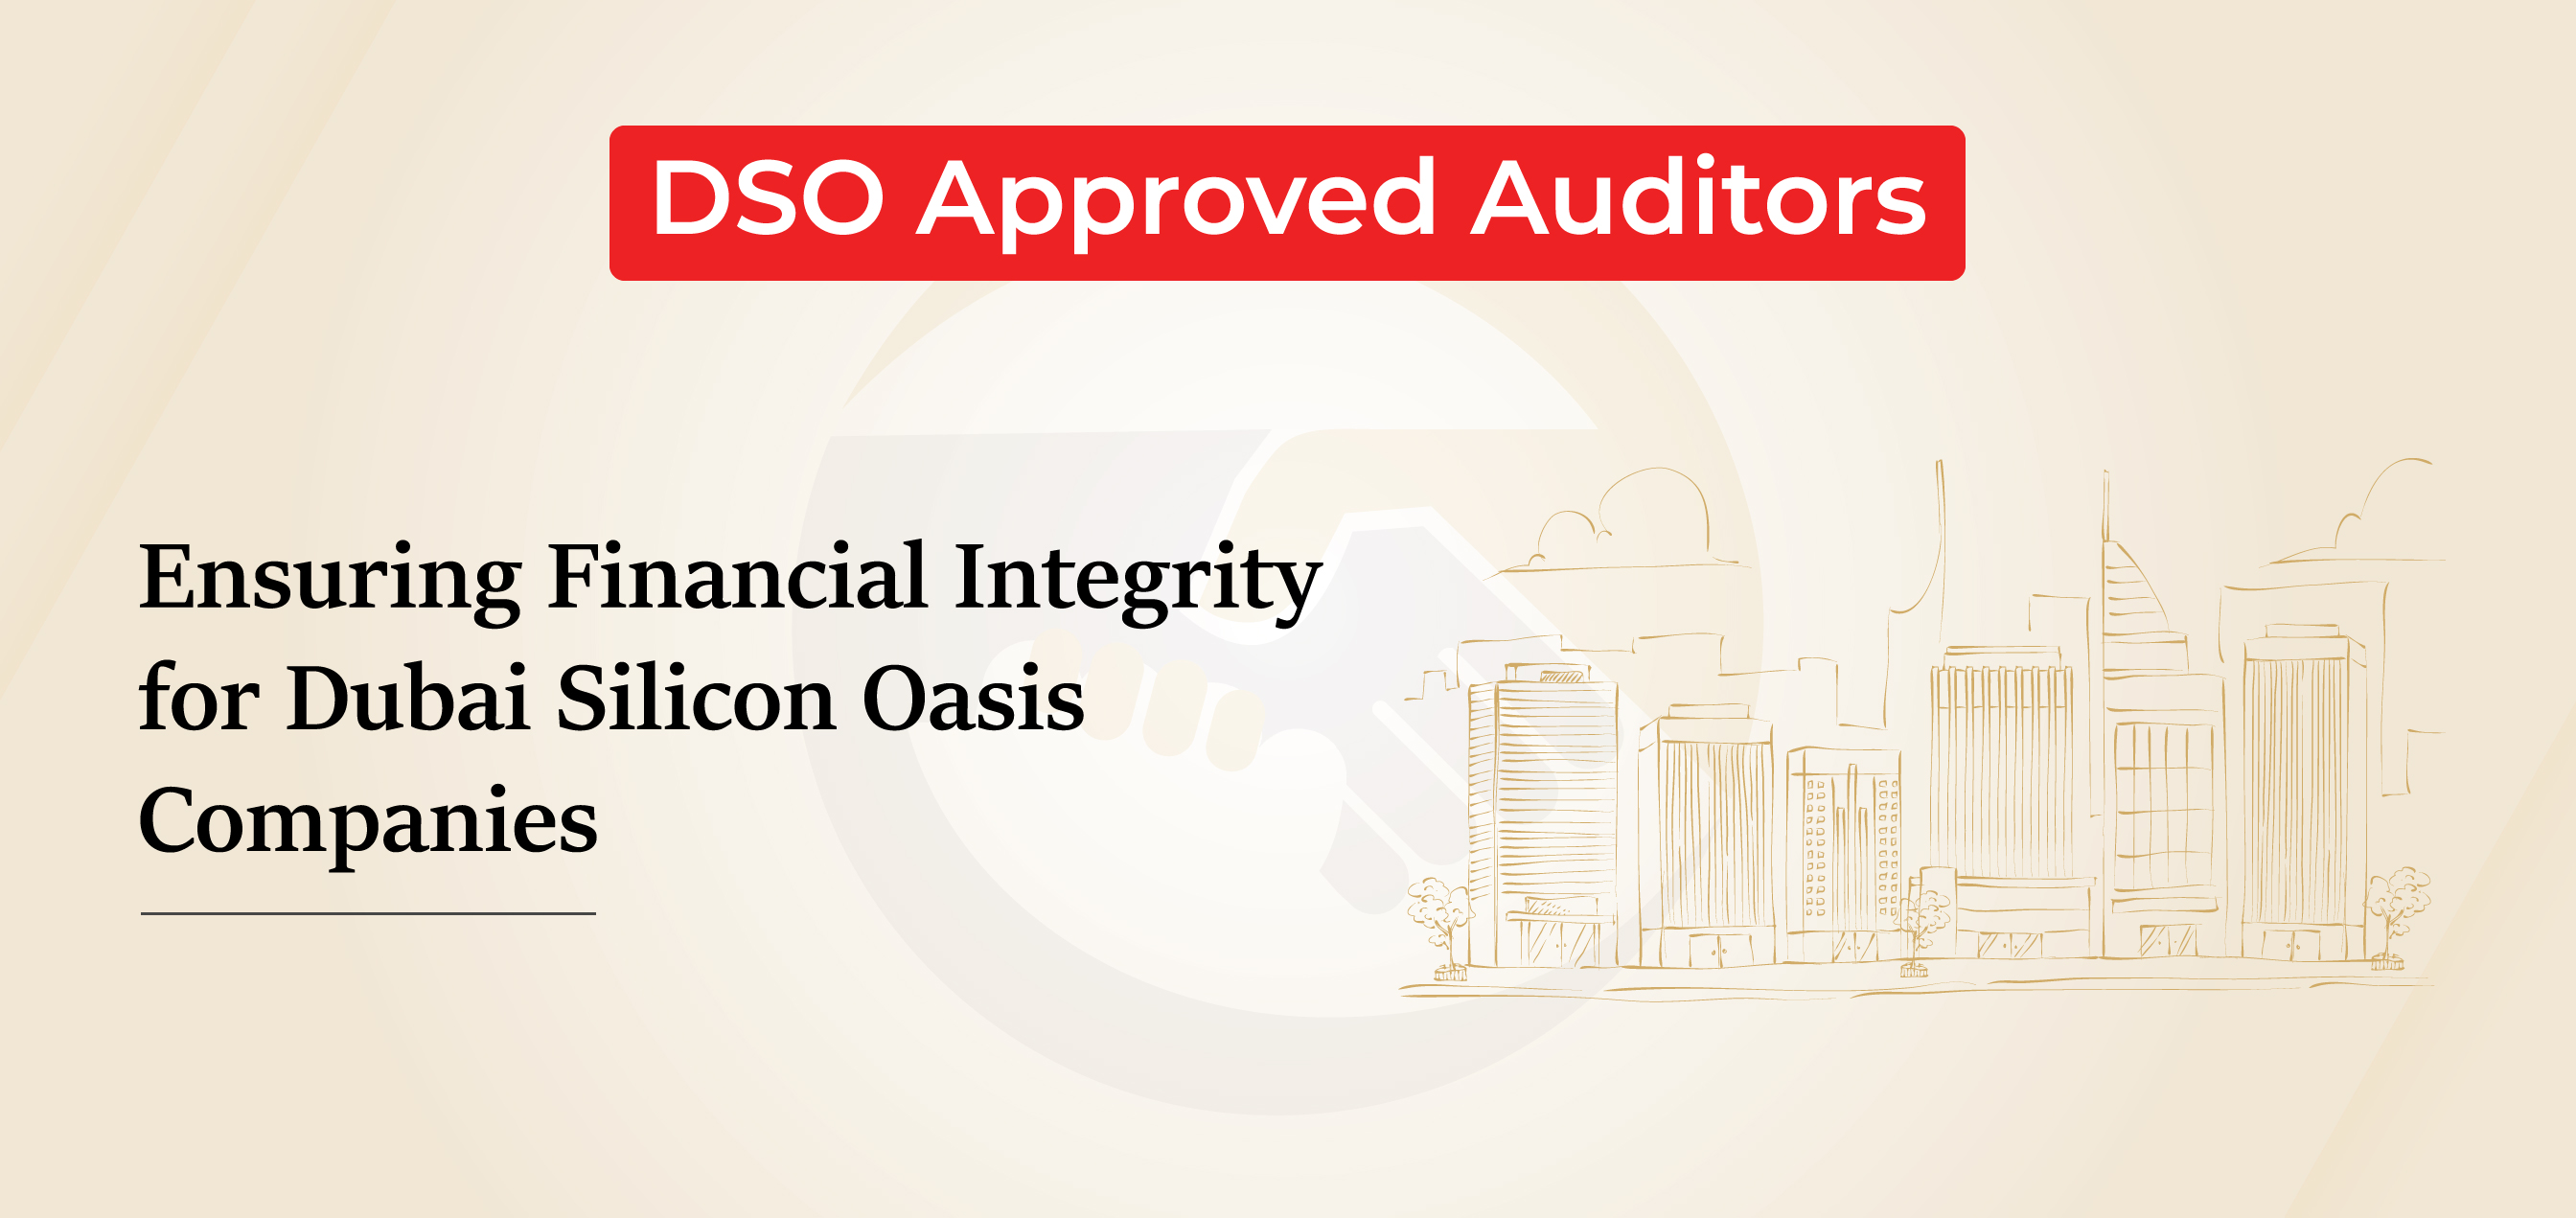 dso-approved-auditors